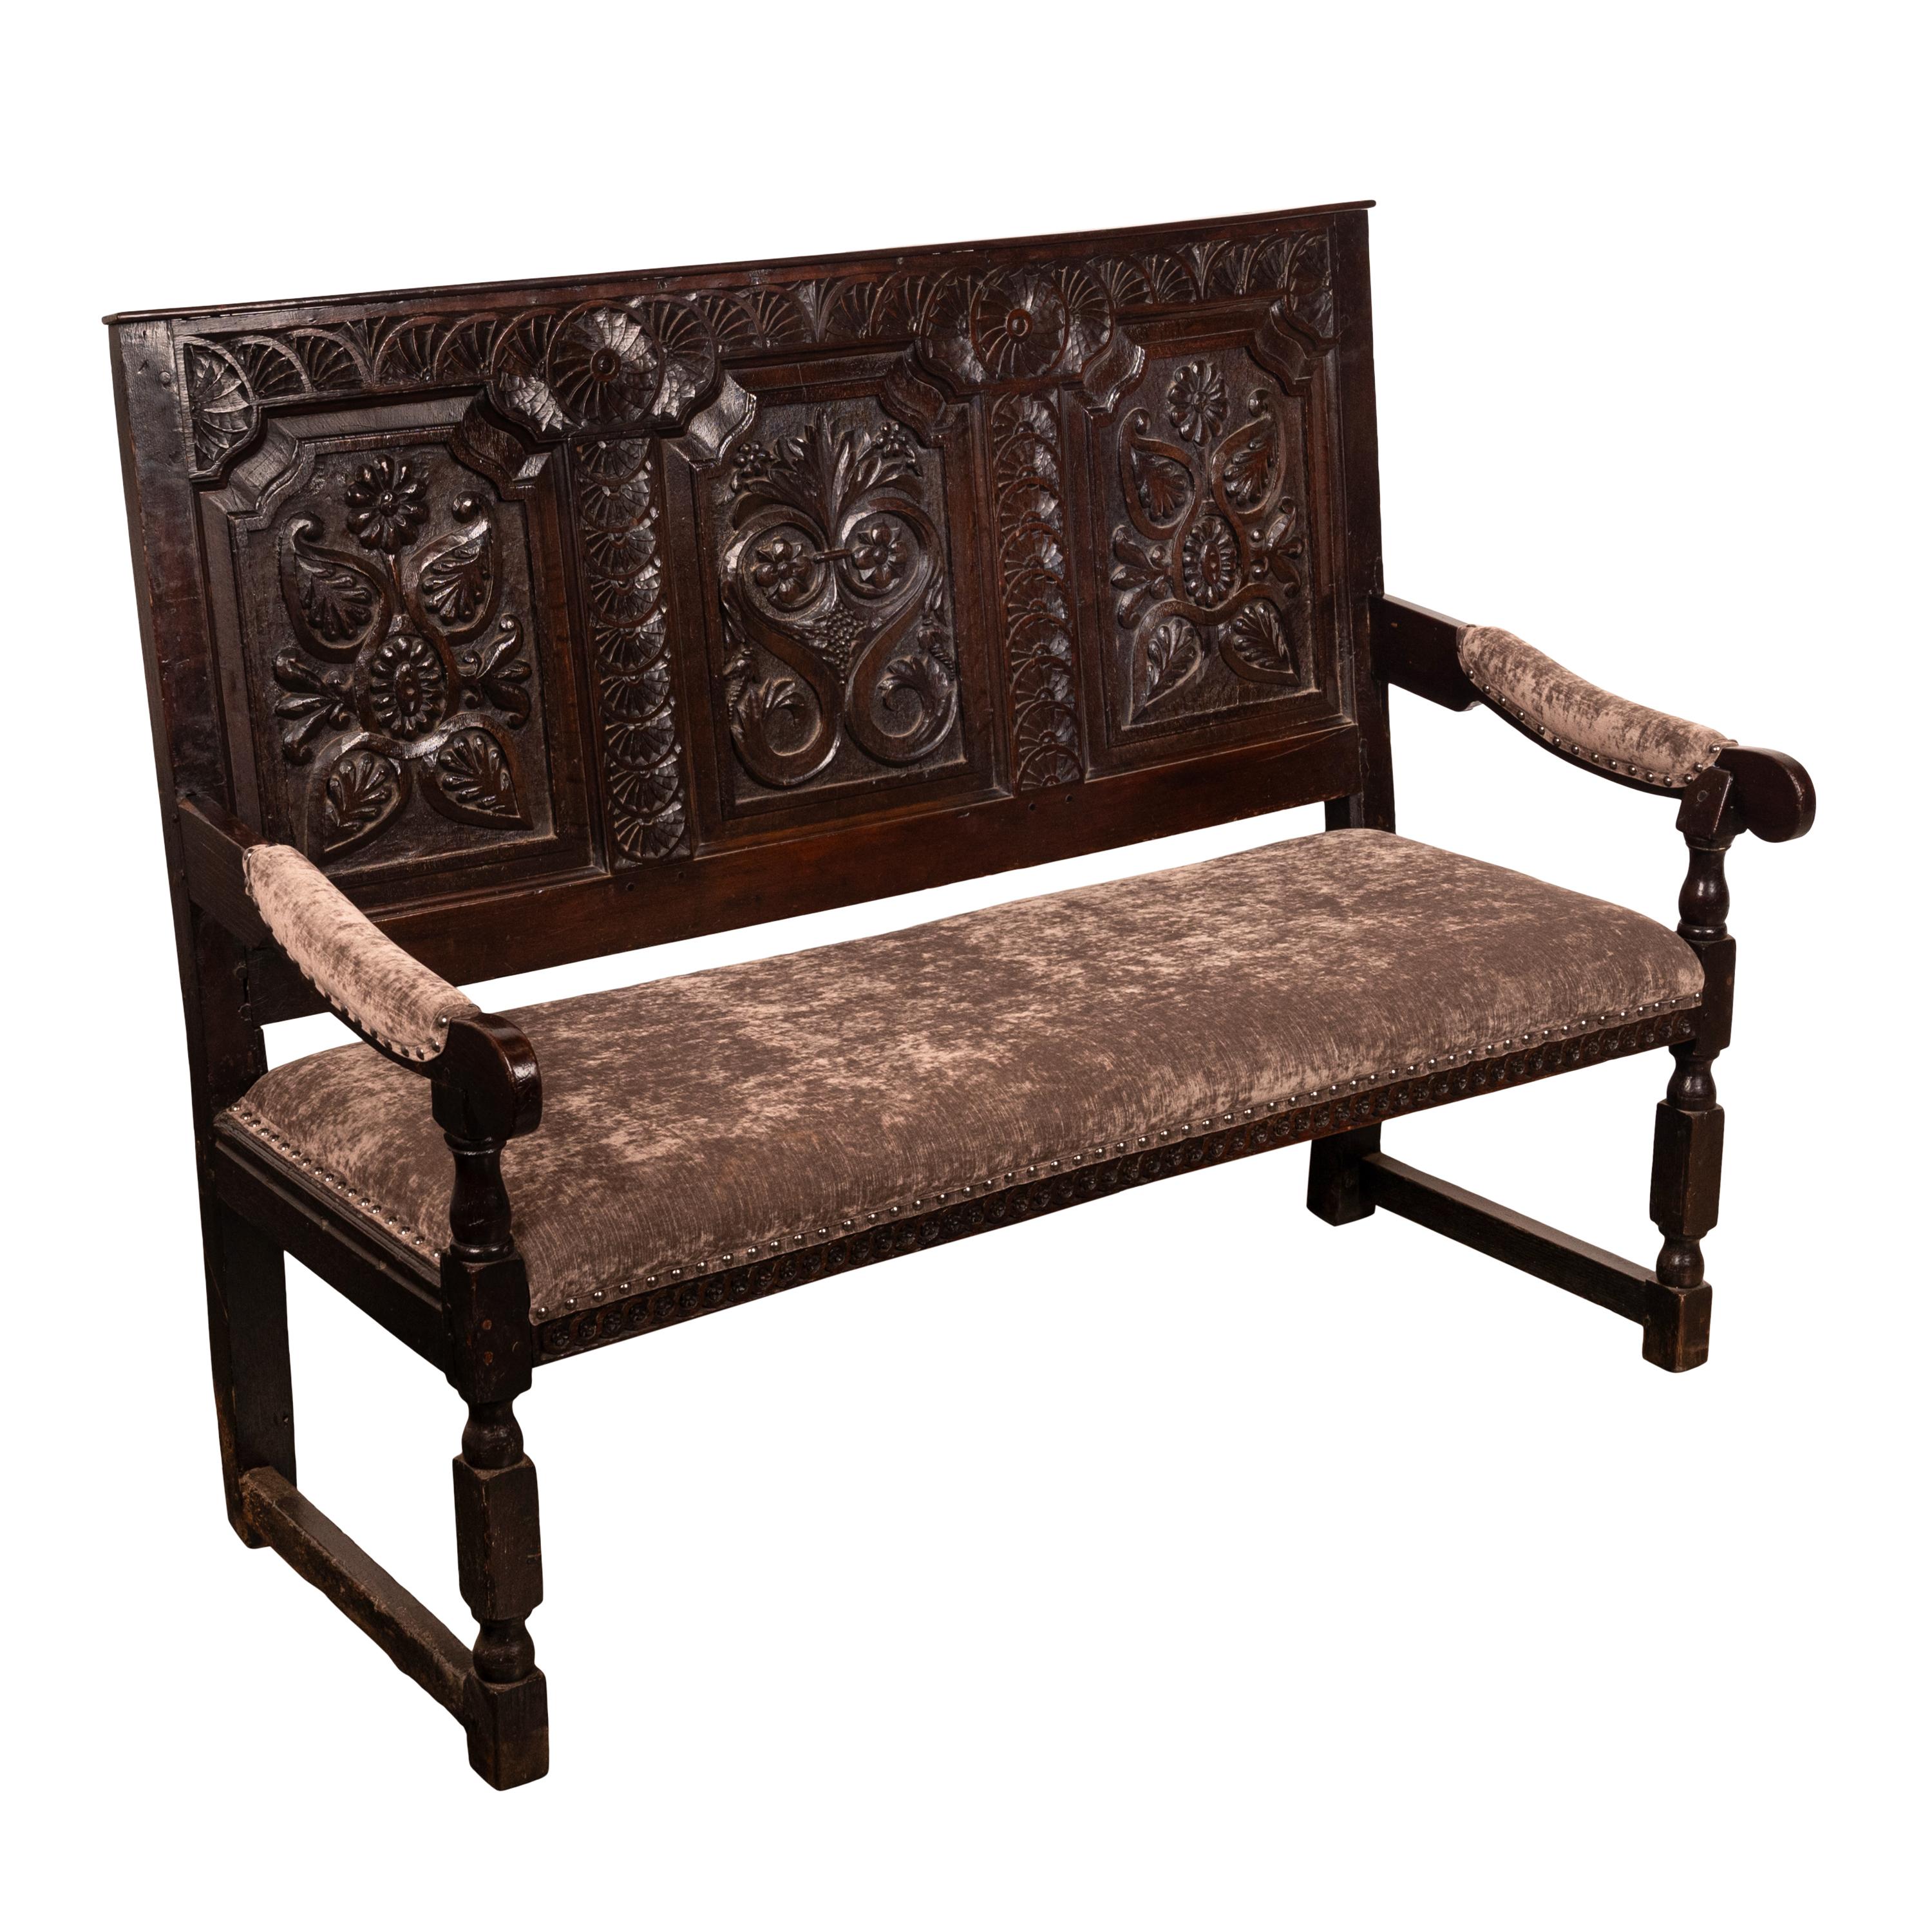 Late 17th Century Antique English 17th Century King Charles II Carved Oak Settle Sofa Bench 1680 For Sale